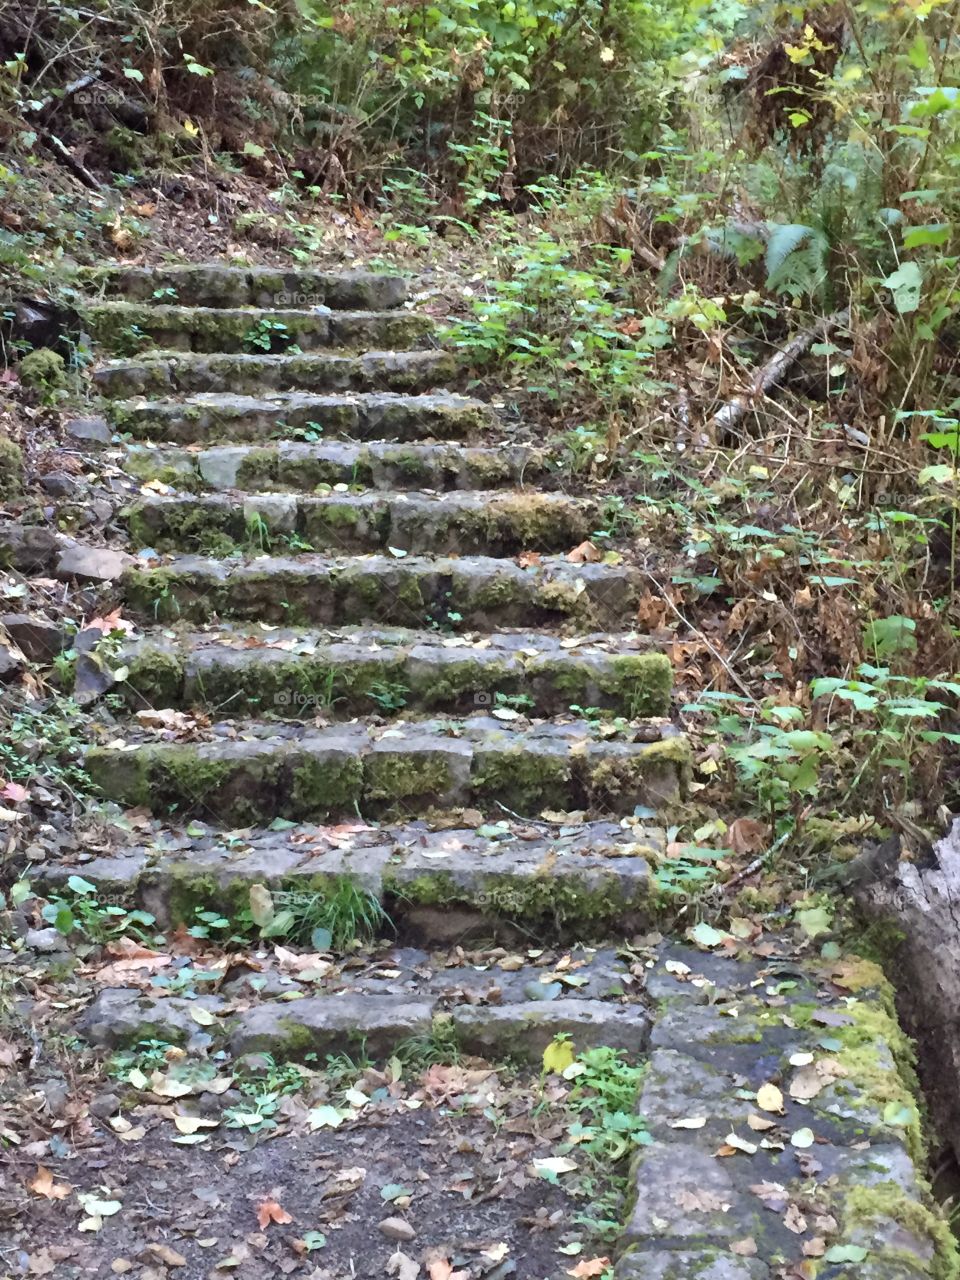 Stairs in the woods